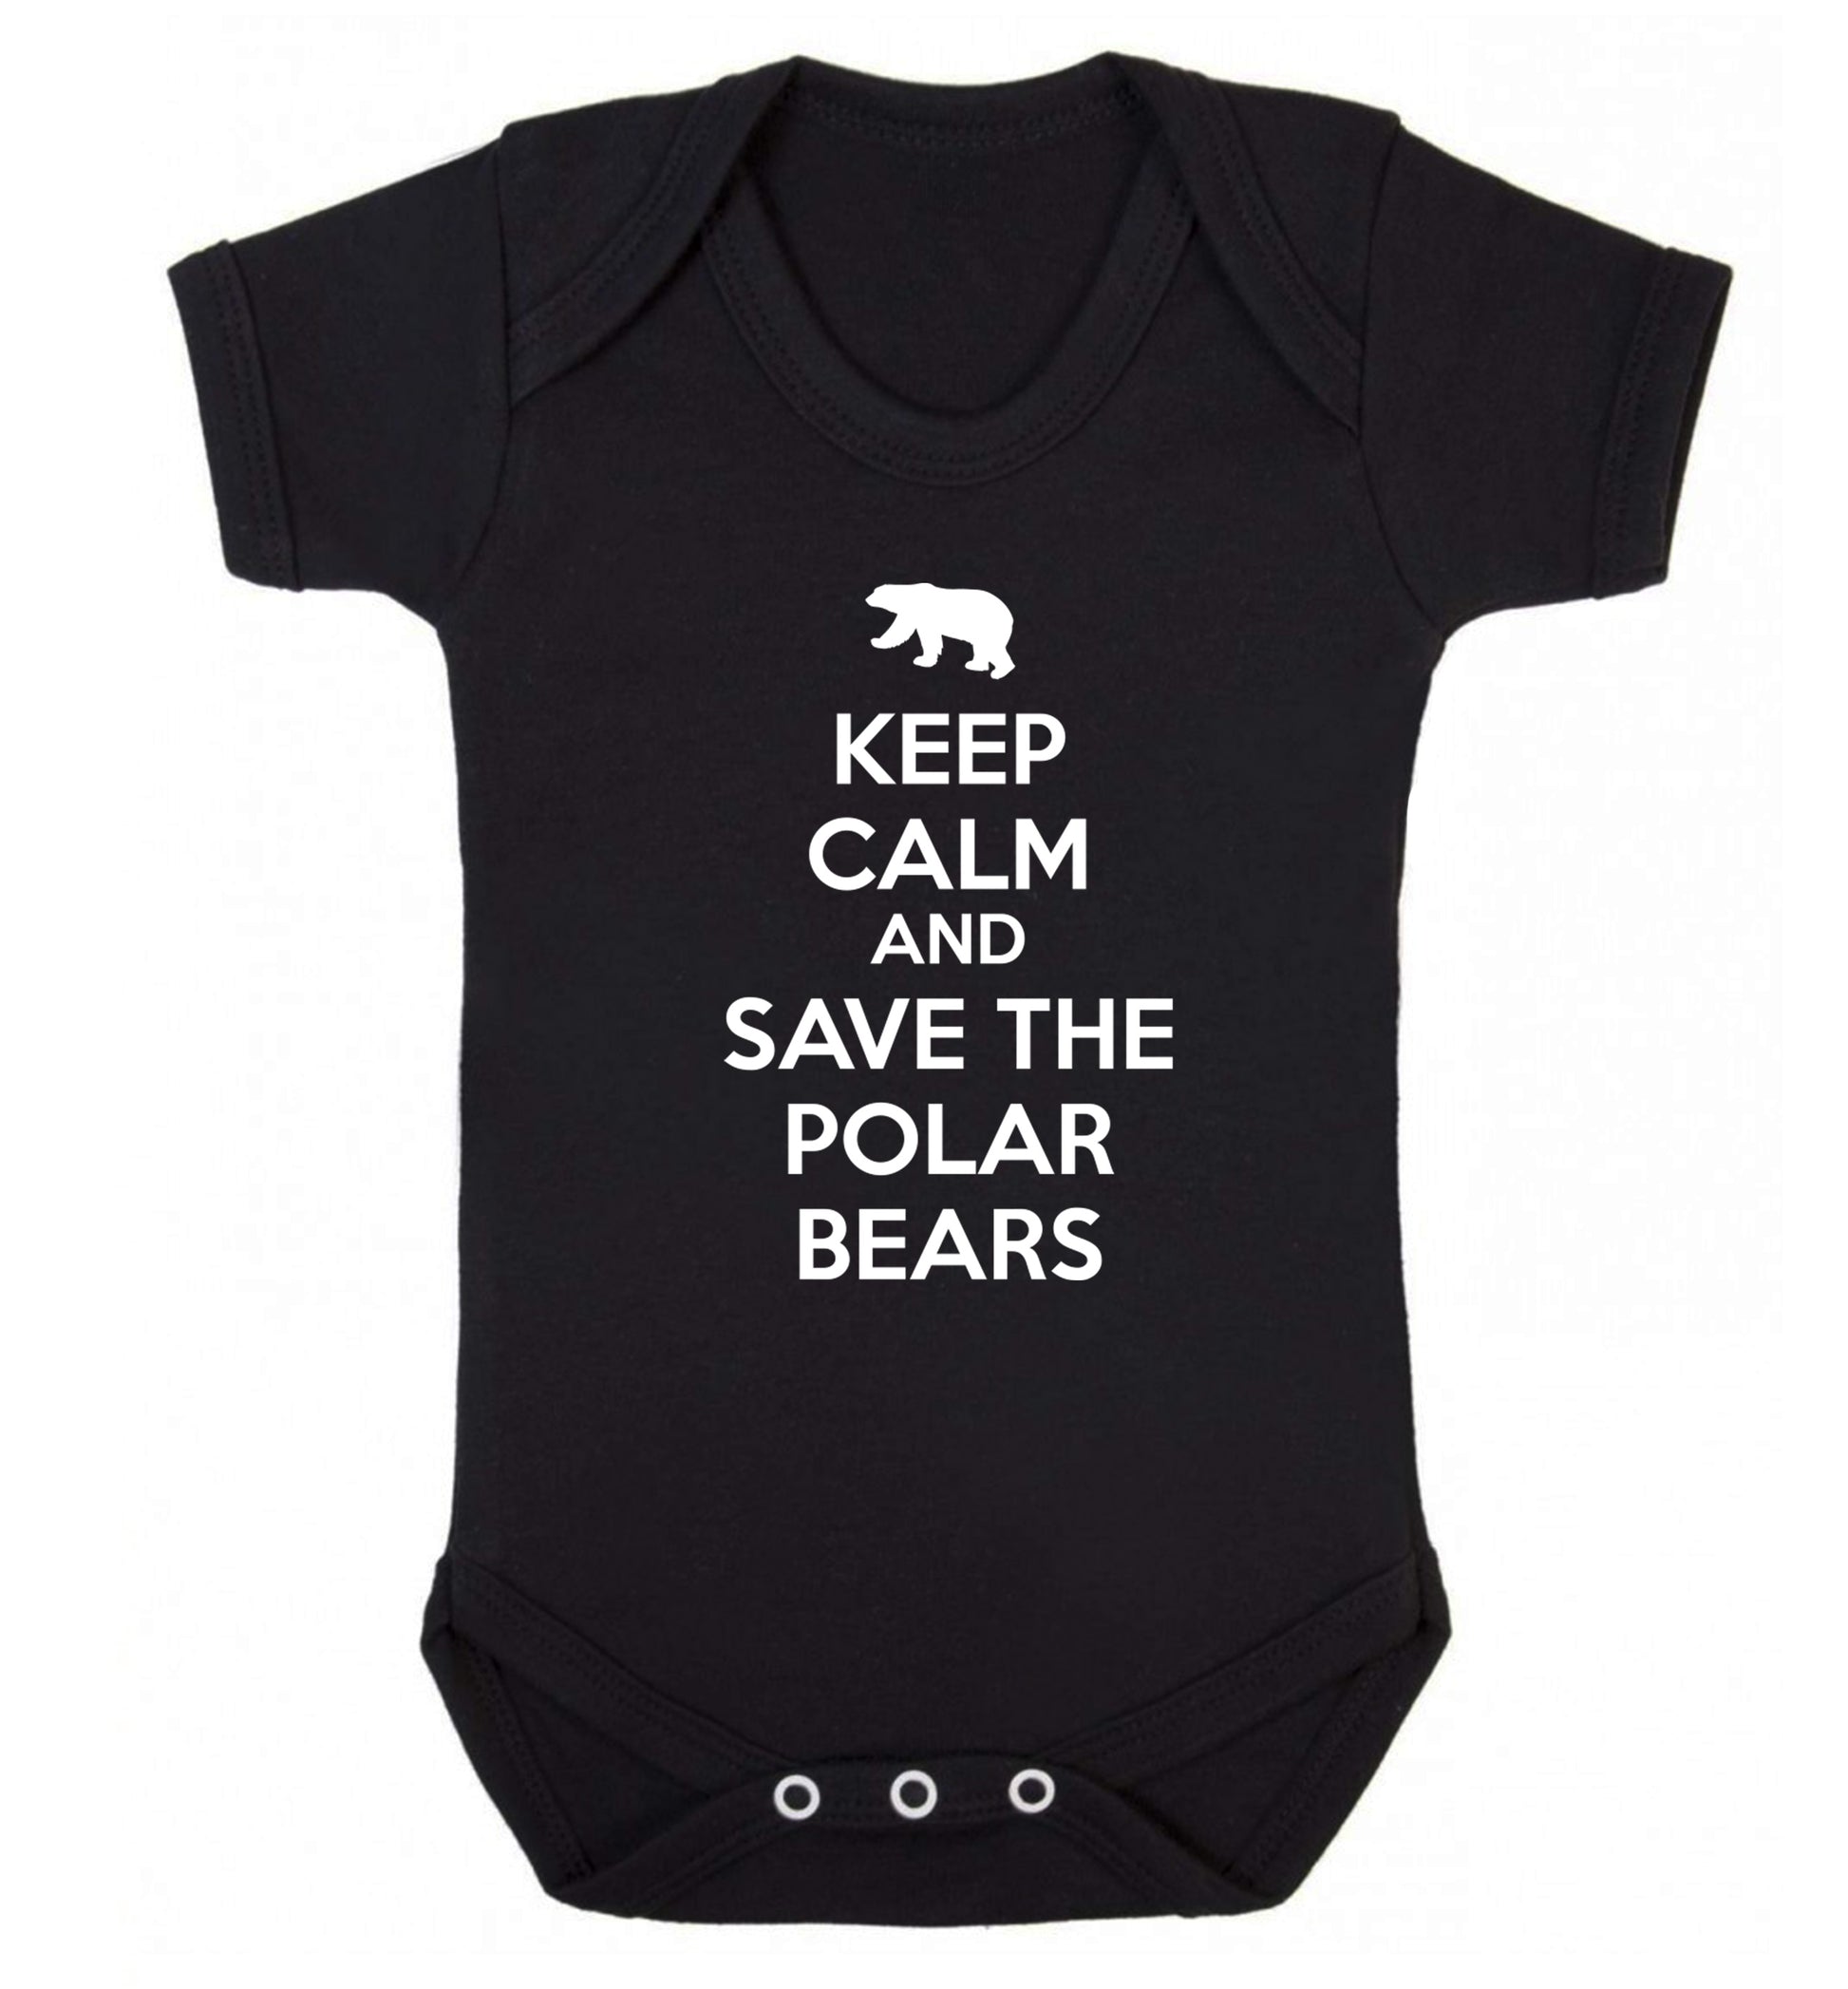 Keep calm and save the polar bears Baby Vest black 18-24 months